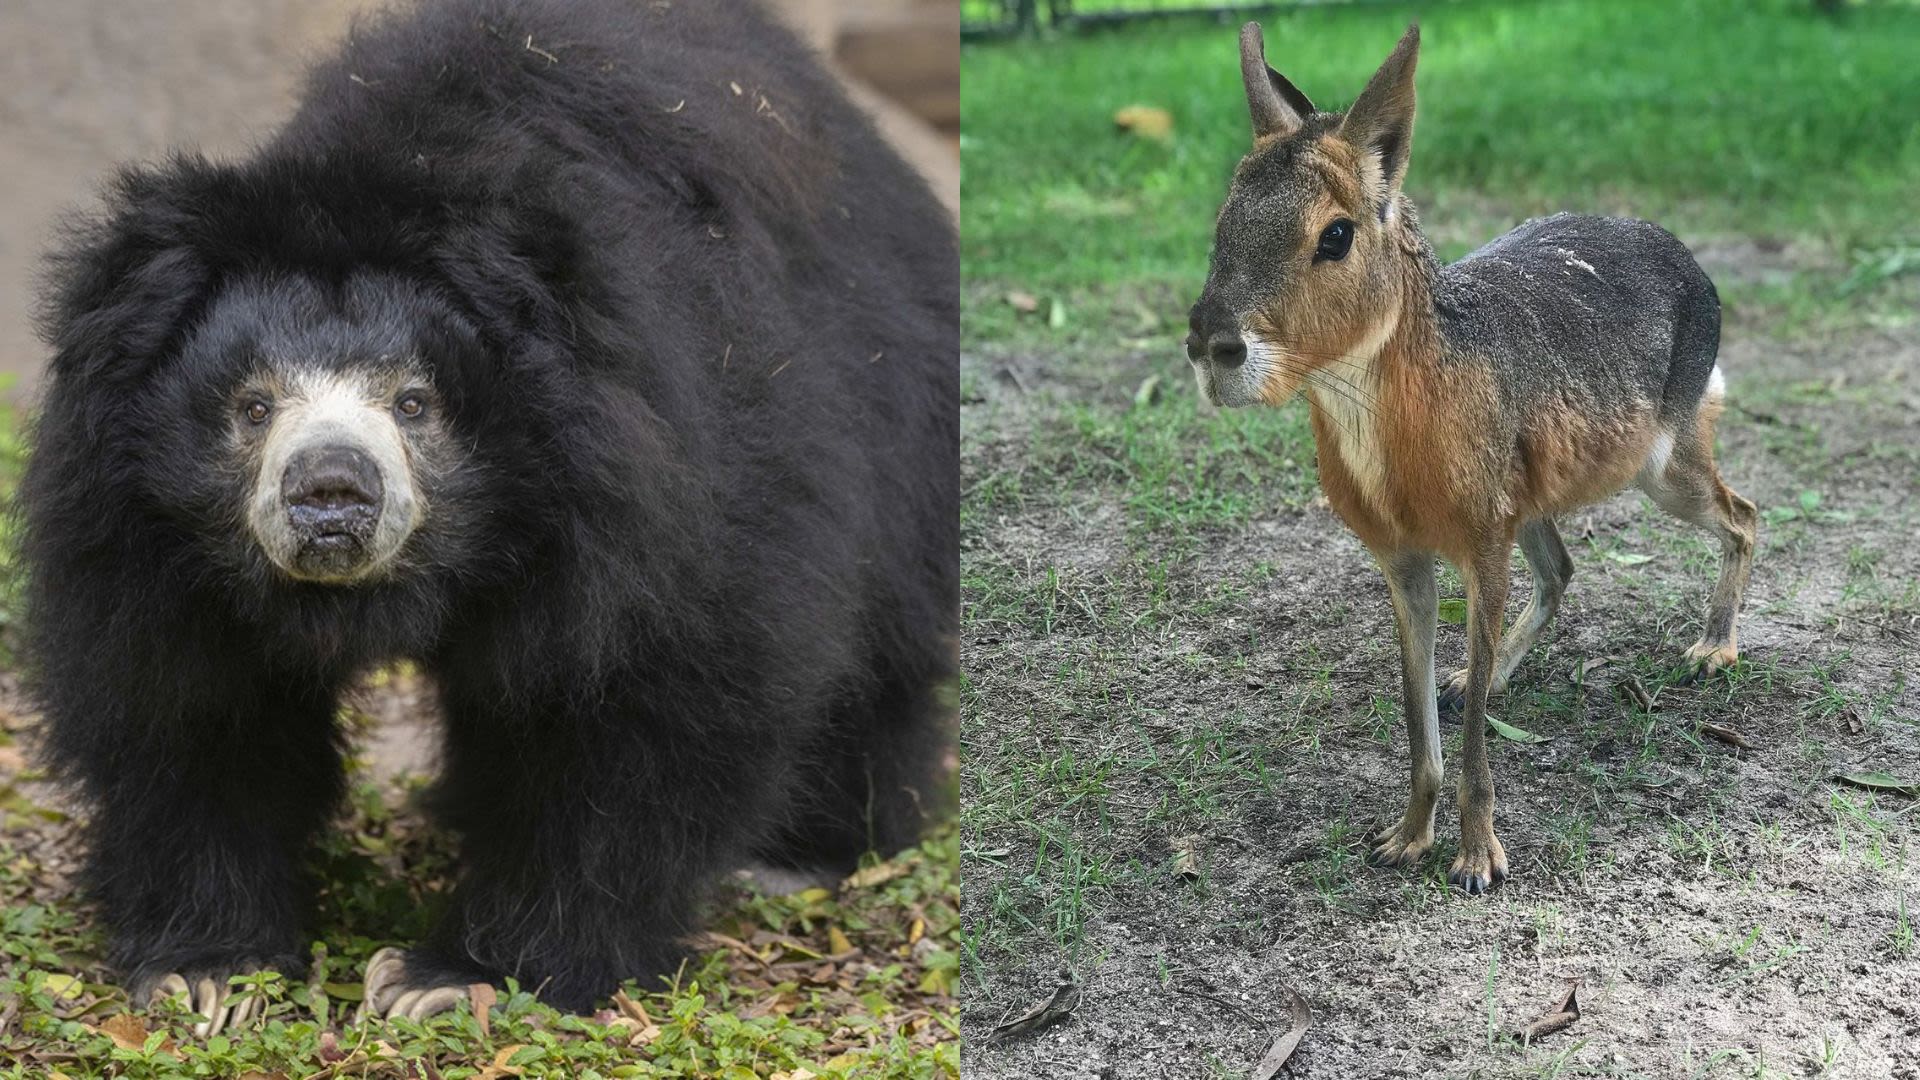 Zoo Miami announces deaths of long-time residents ‘Tango’ and ‘Keesha’ - WSVN 7News | Miami News, Weather, Sports | Fort Lauderdale